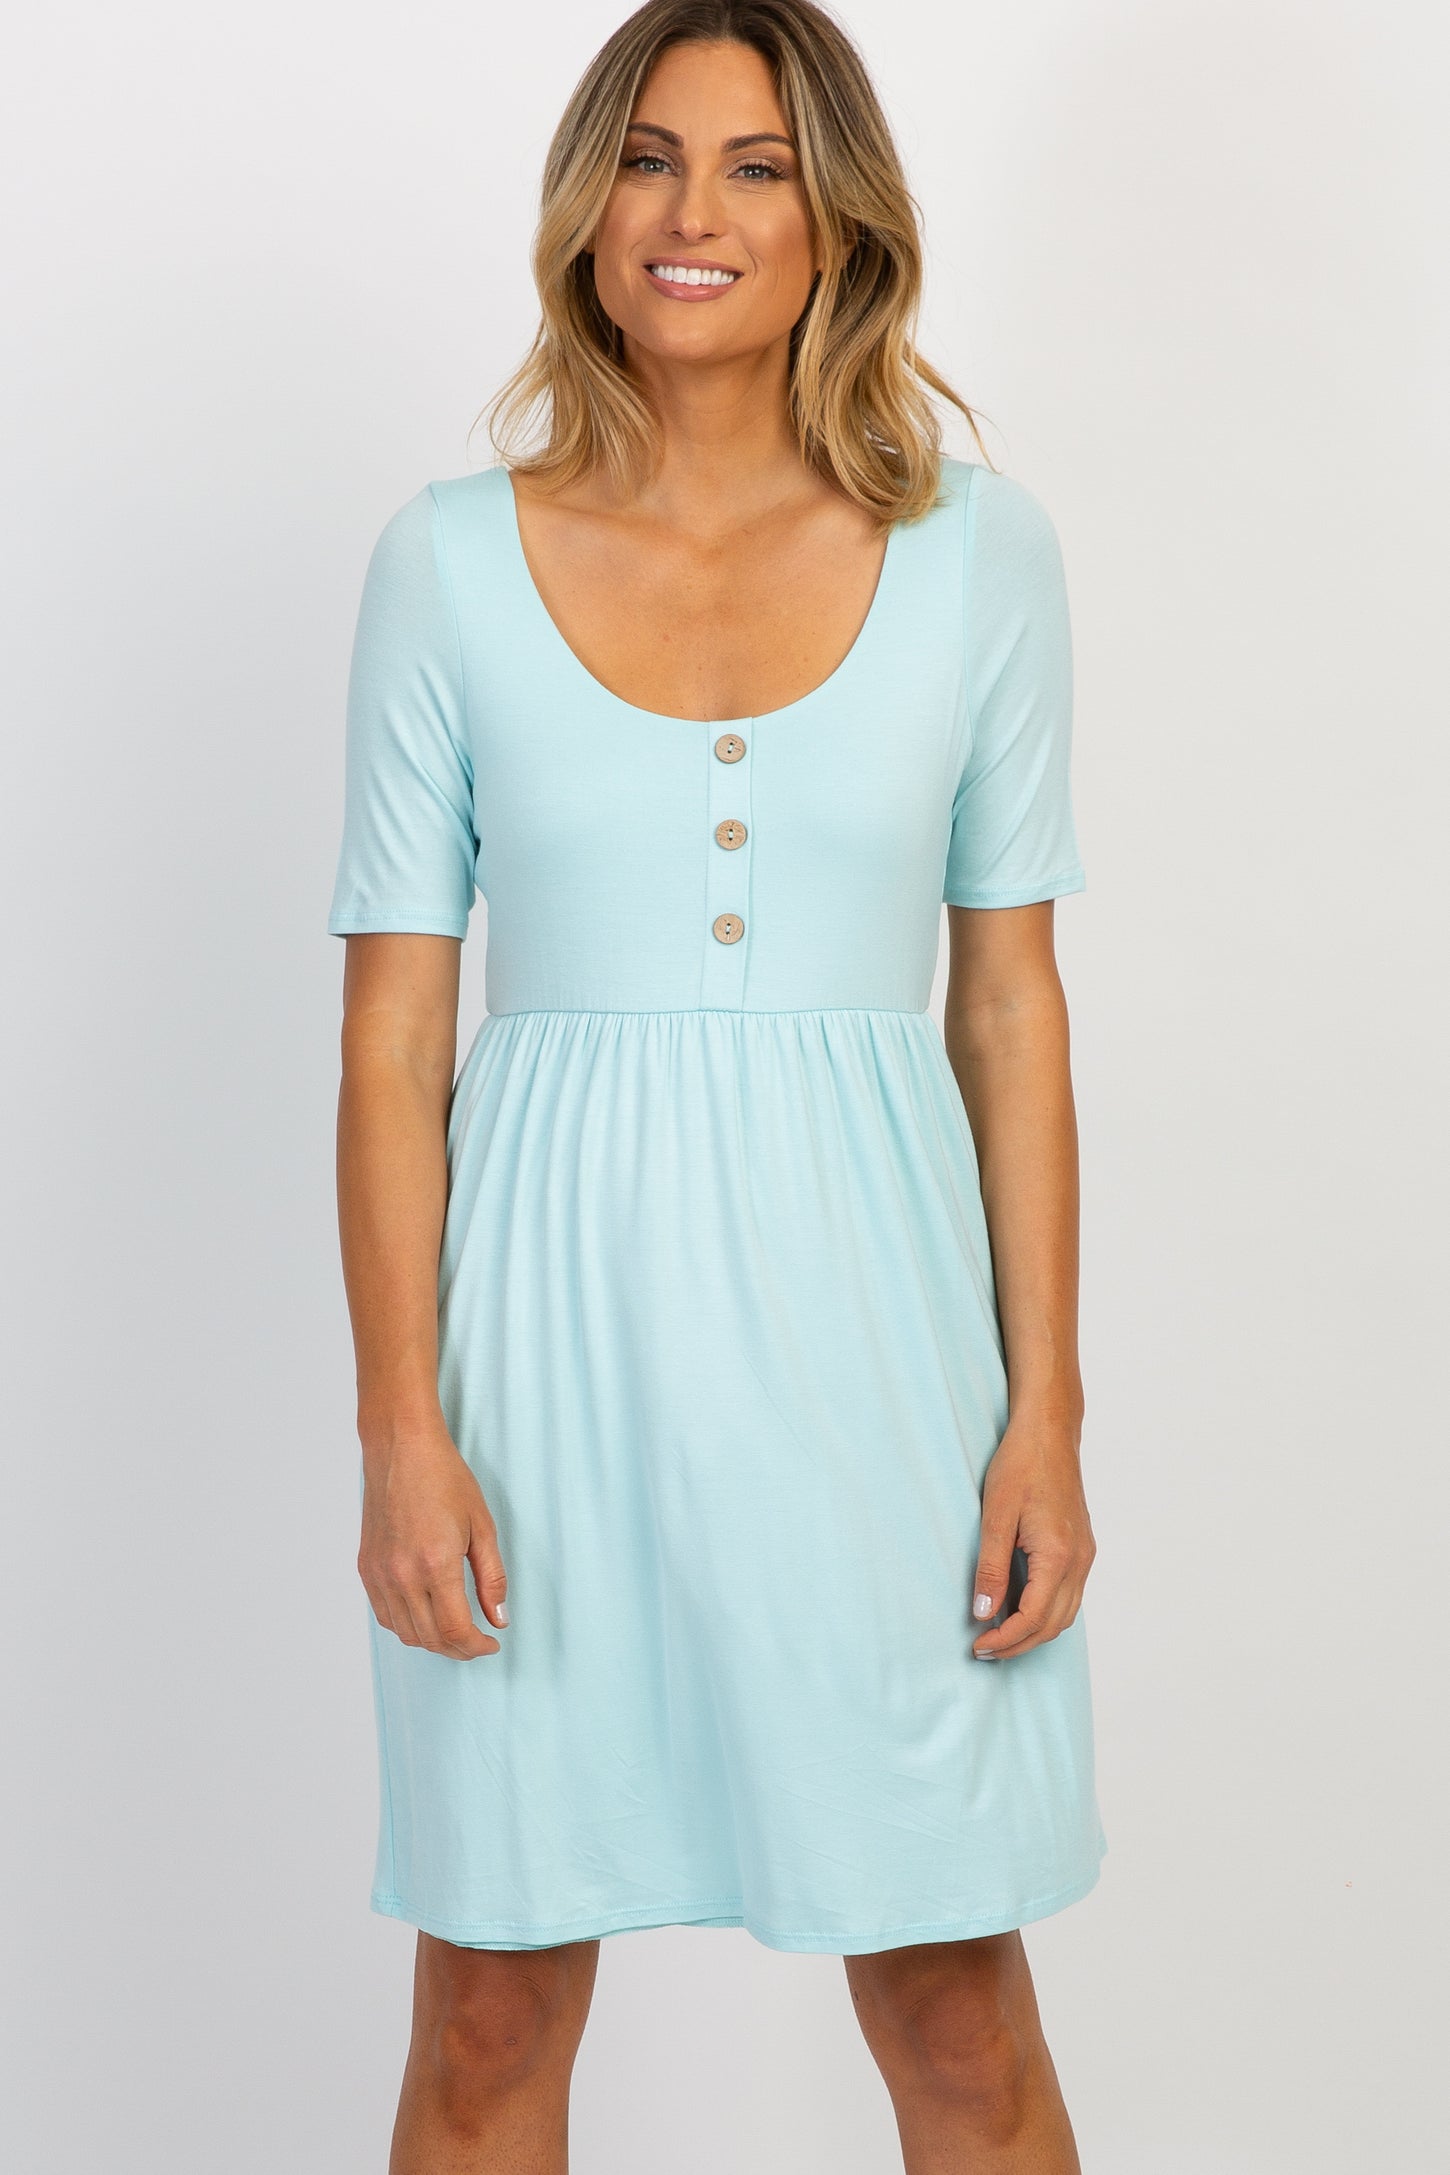 PinkBlush Mint Green Solid Button Front Dress